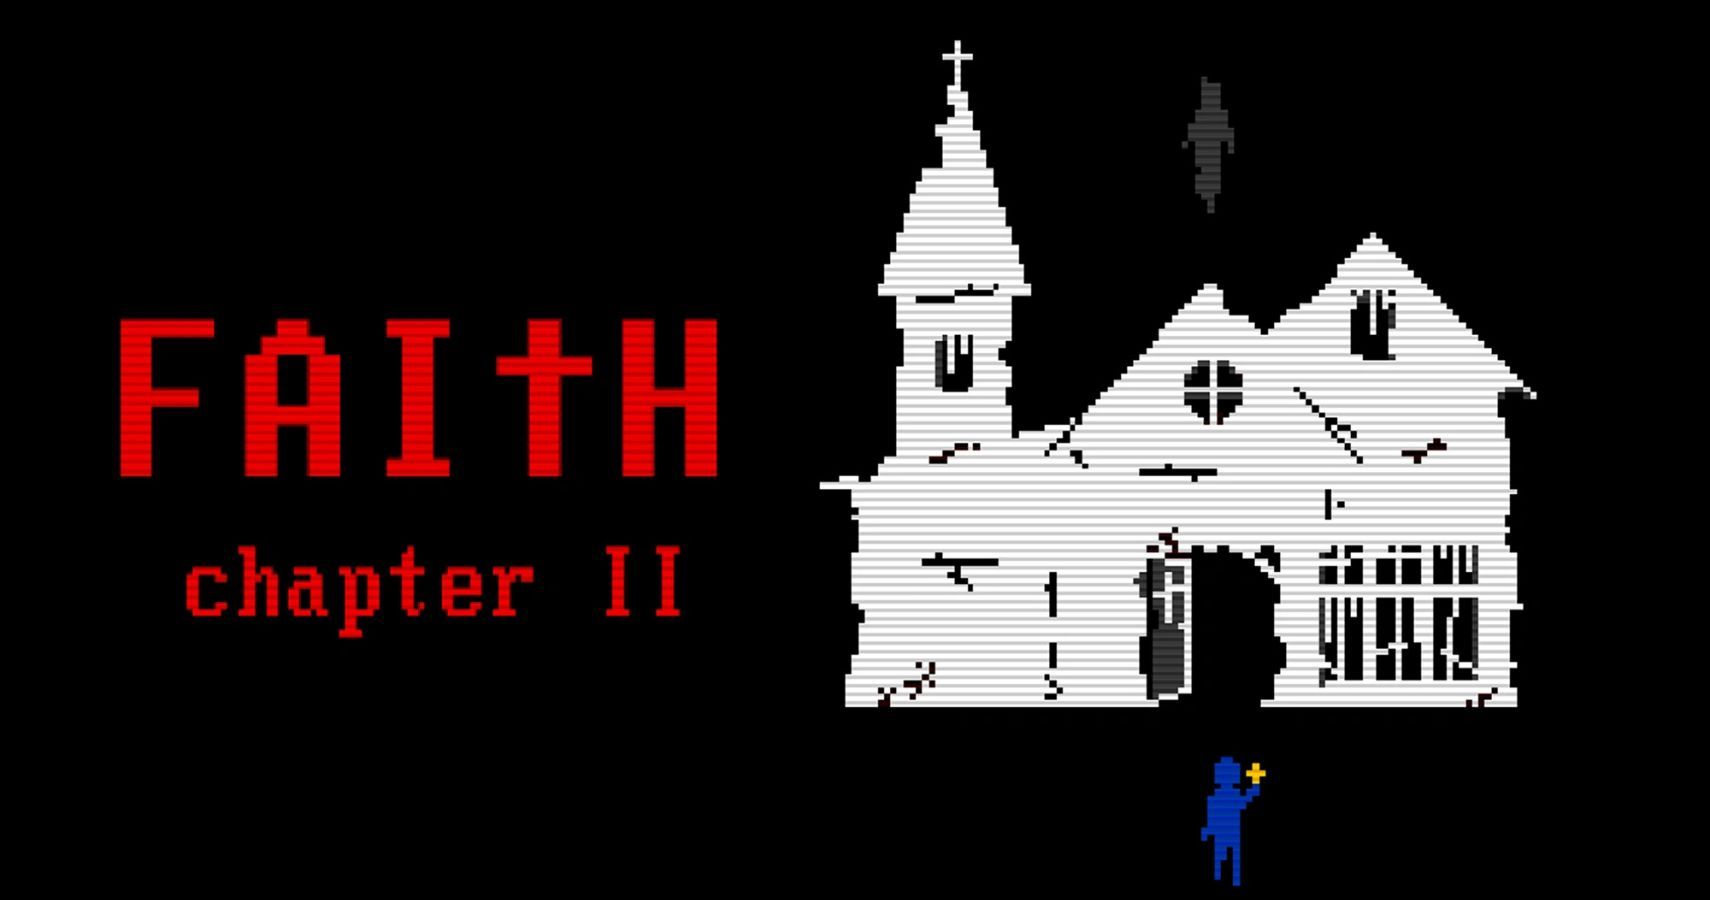 faith-chapter-2-is-a-pixel-horror-game-inspired-by-the-satanic-scare-of-the-80s-gametiptip